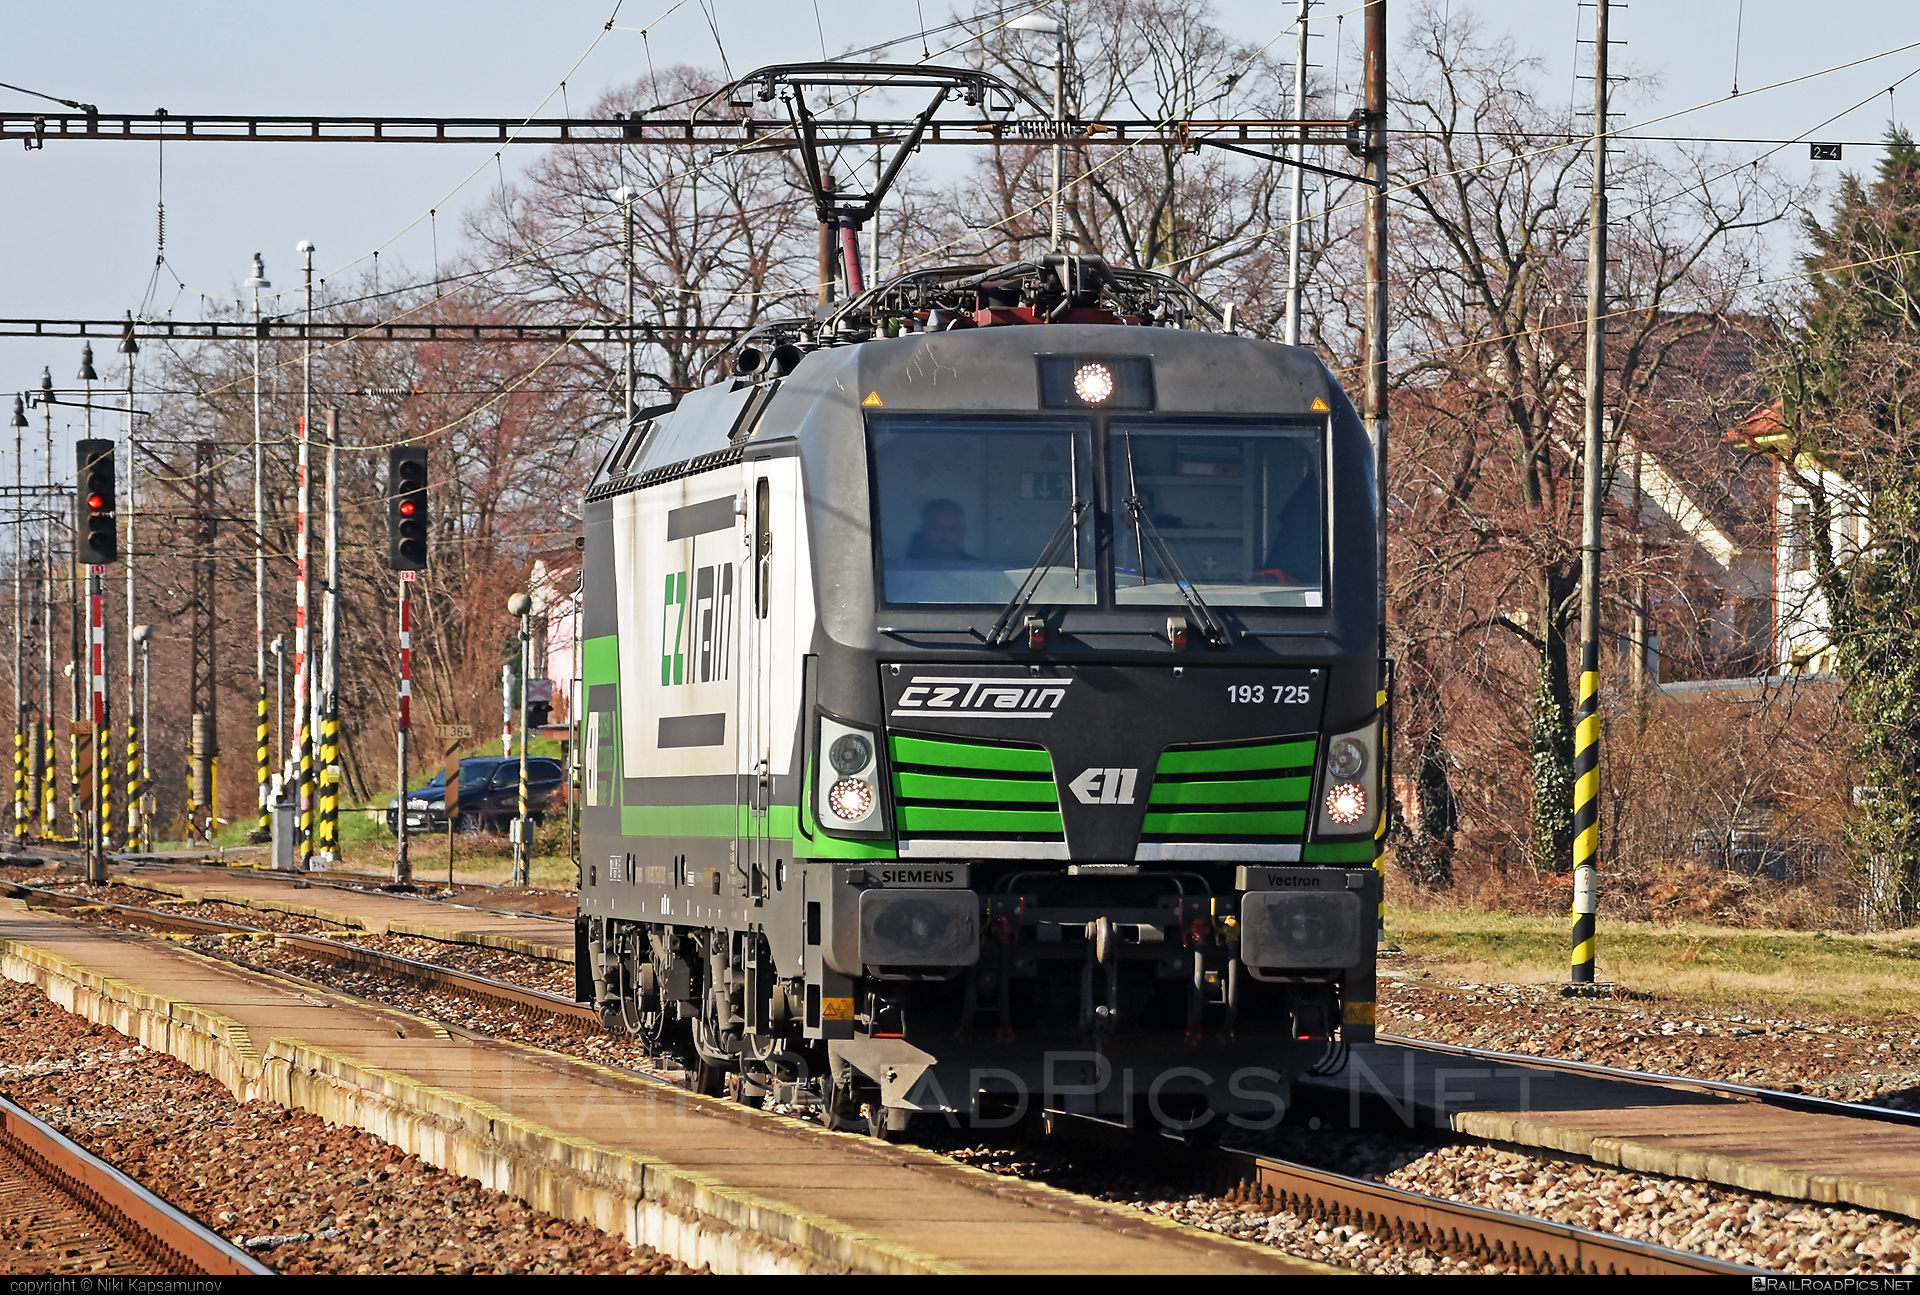 Siemens Vectron MS - 193 725 operated by I. G. Rail, s. r. o. #cztrain #ell #ellgermany #eloc #europeanlocomotiveleasing #igrail #siemens #siemensVectron #siemensVectronMS #vectron #vectronMS